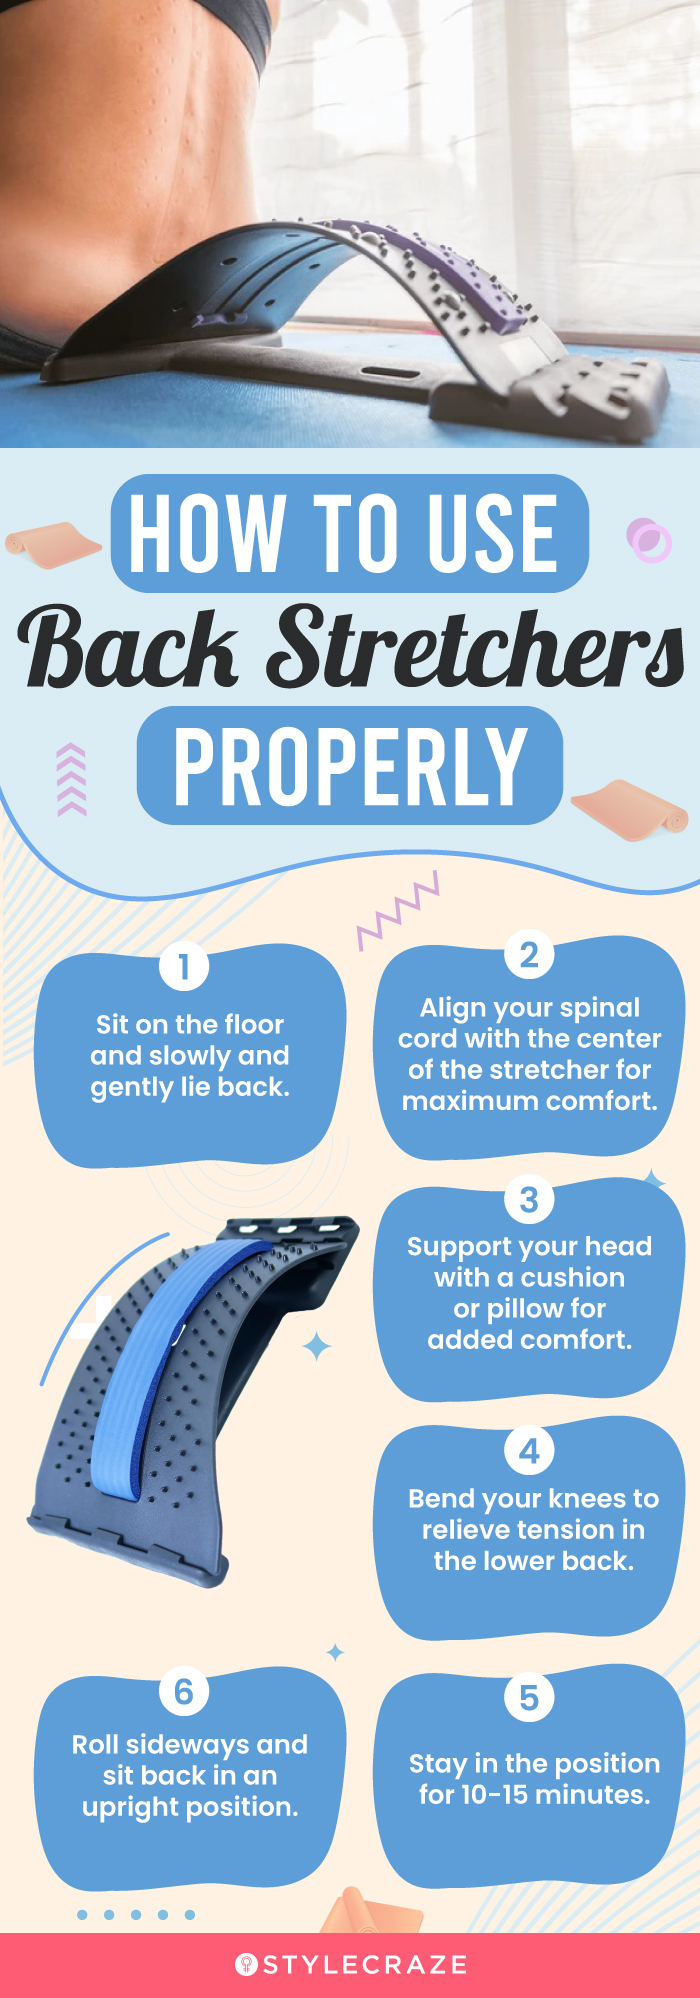 How To Use Back Stretchers Properly (infographic)